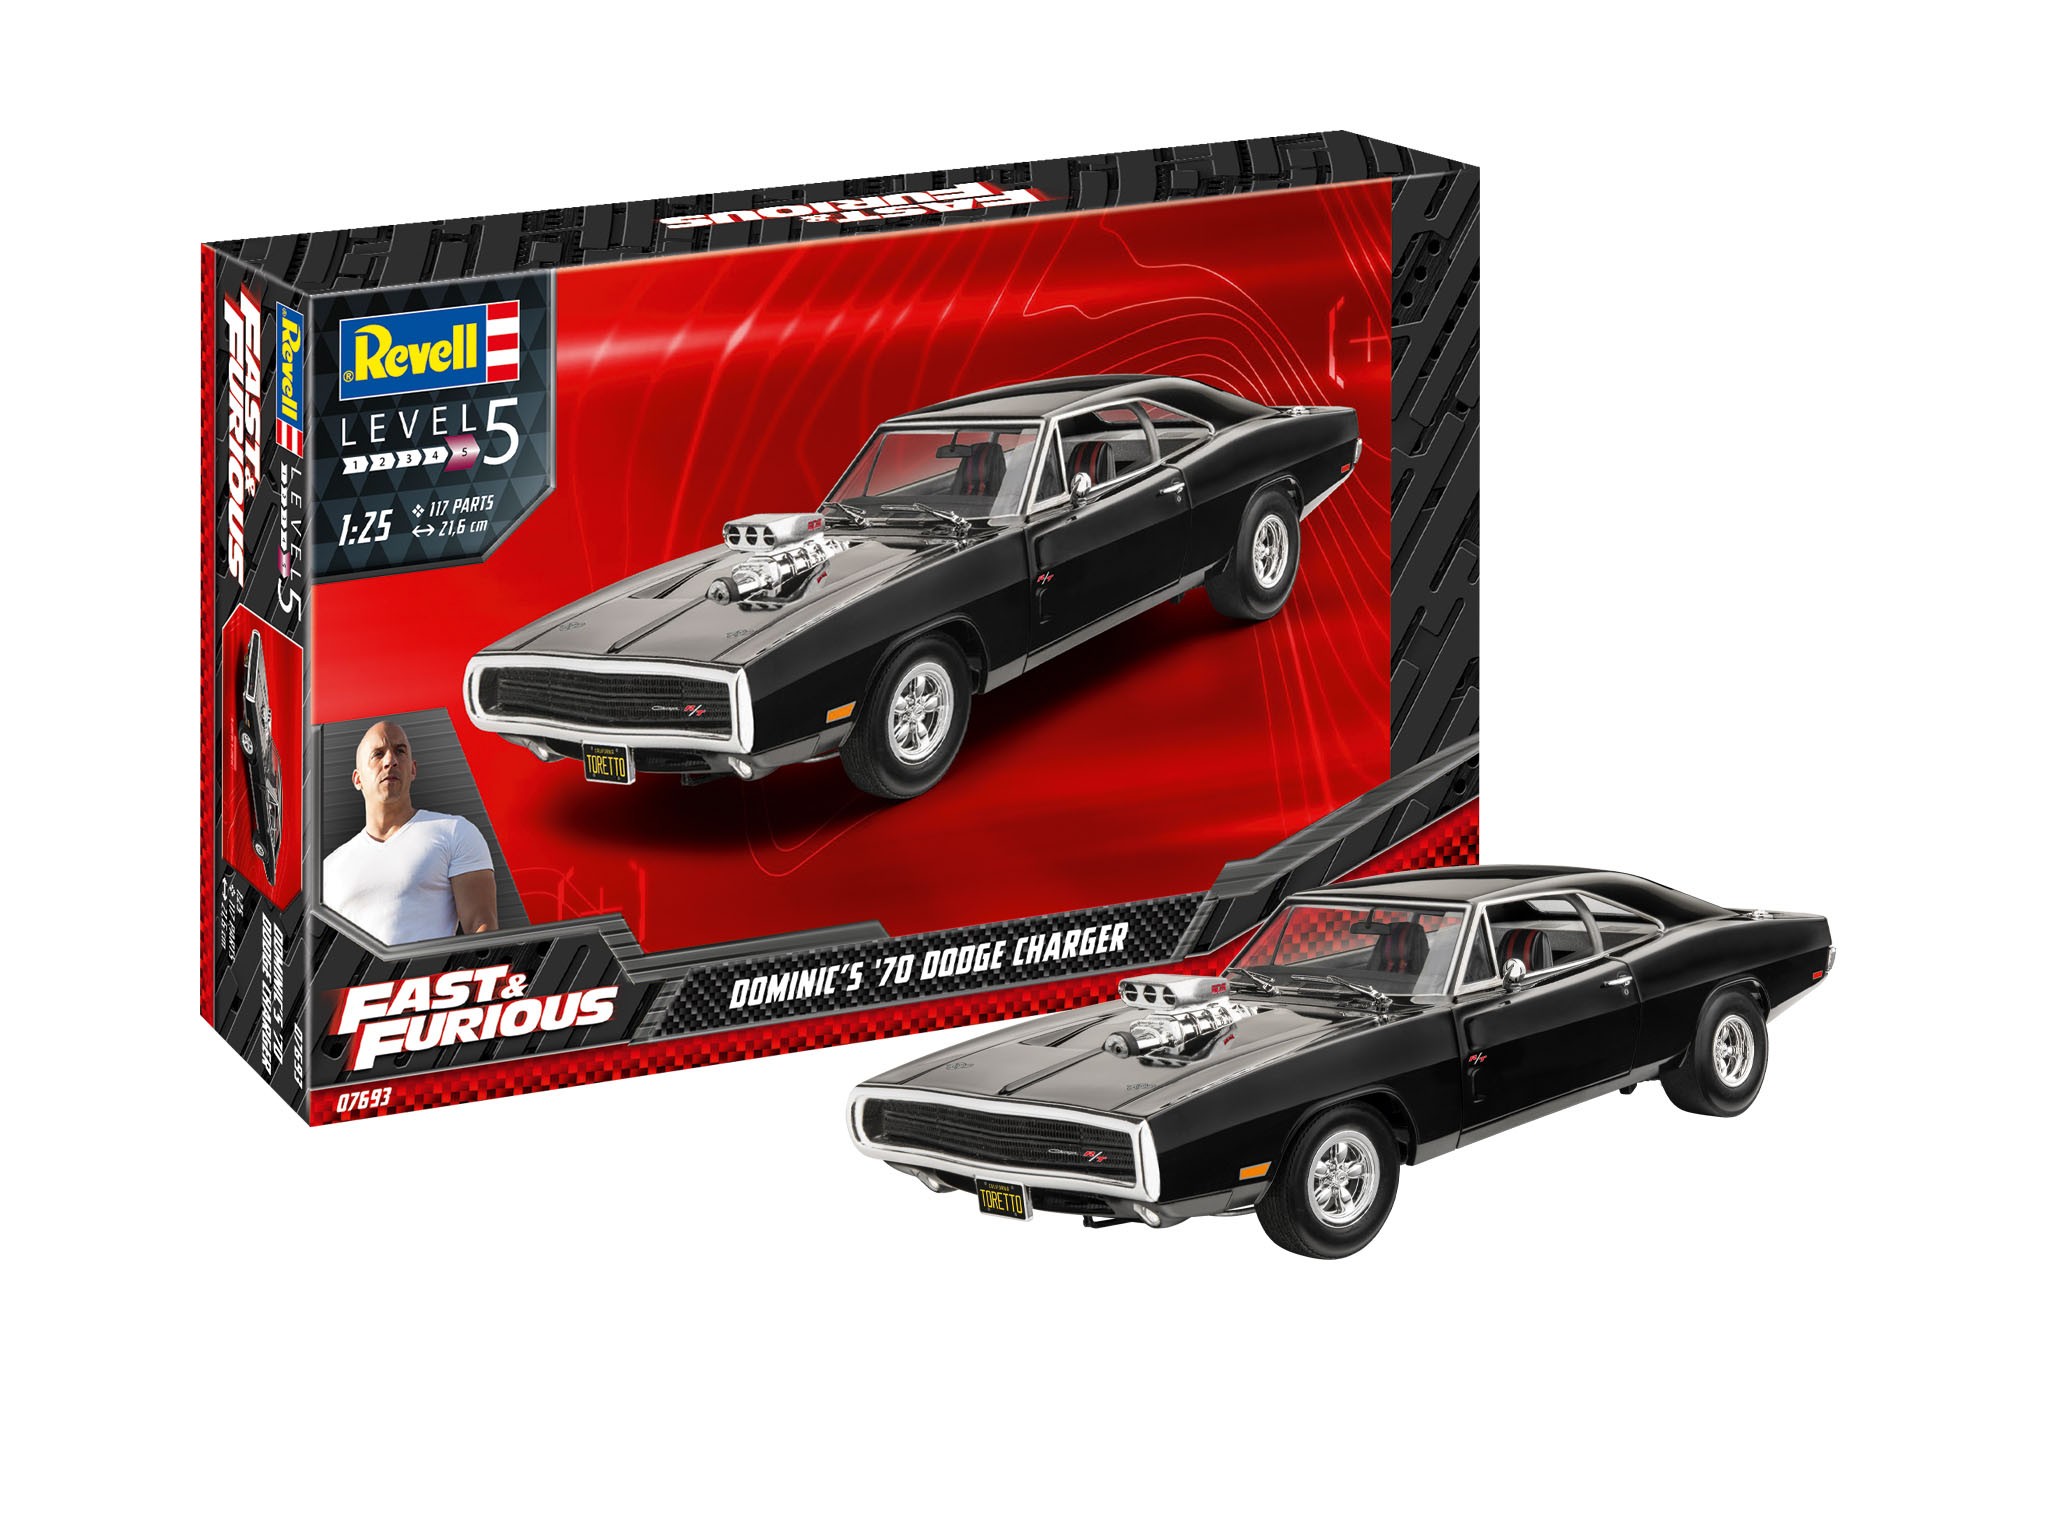 Revell 67693 Fast & Furious - Dominics 1970 Dodge Charger  1:25  " Model-Set "